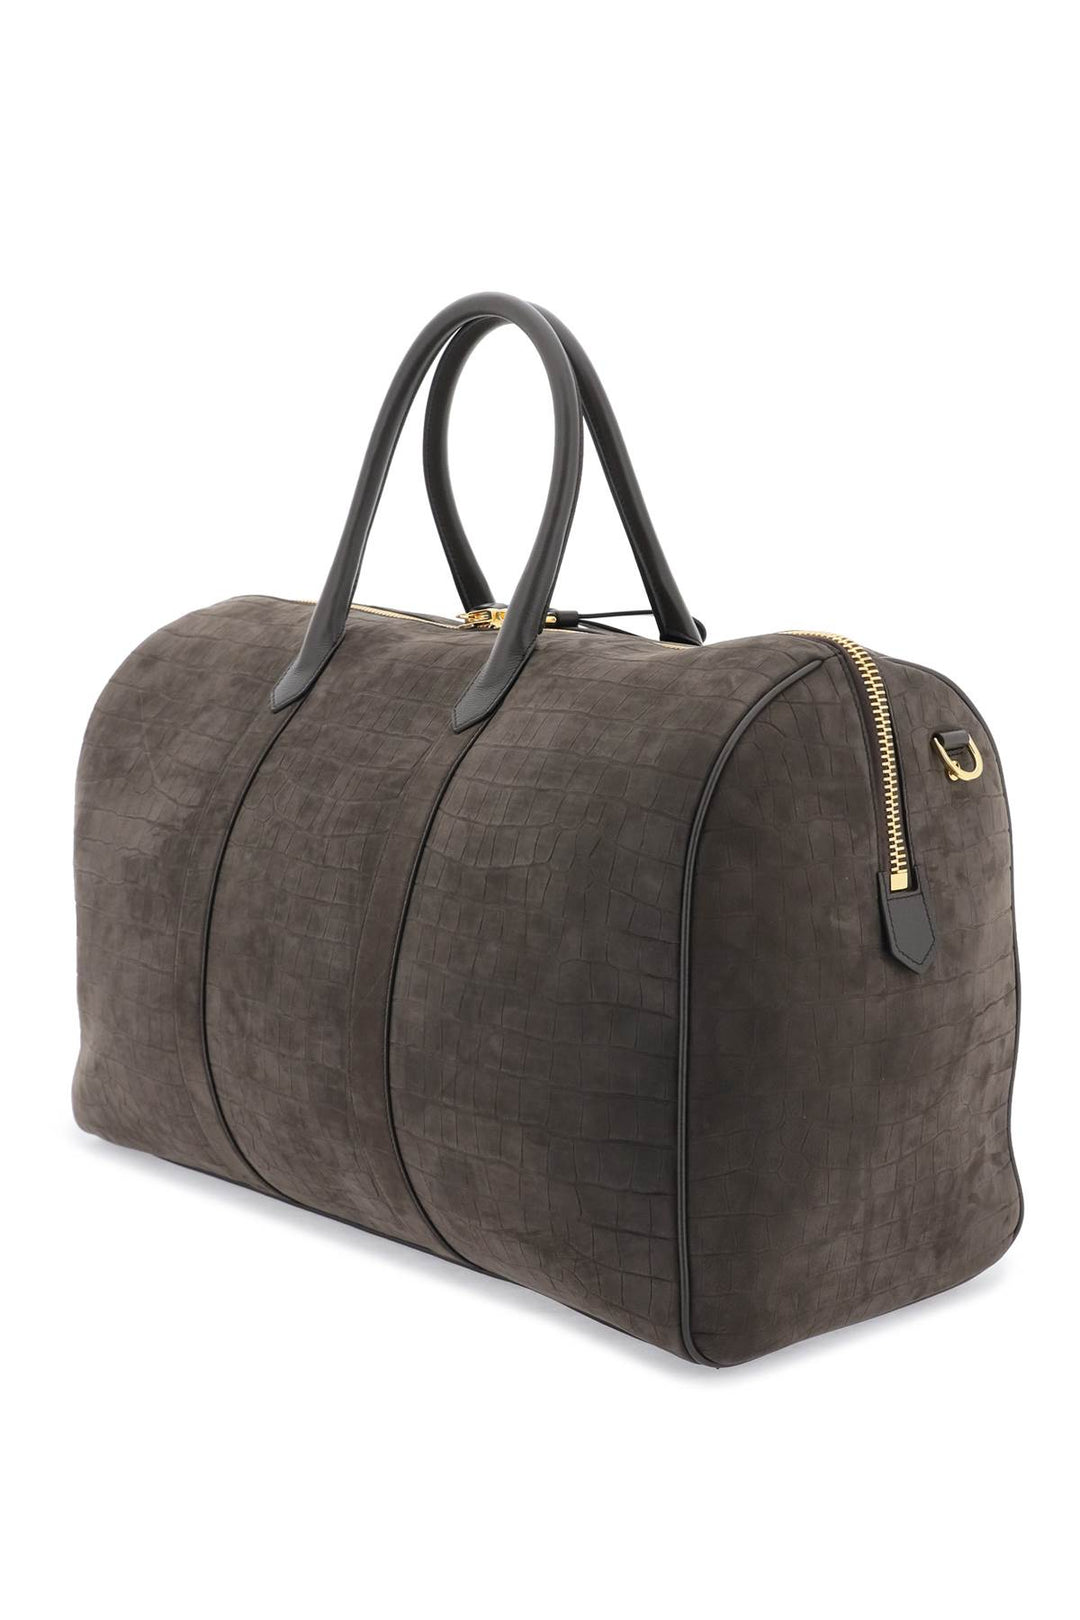 Tom ford suede duffle bag-1